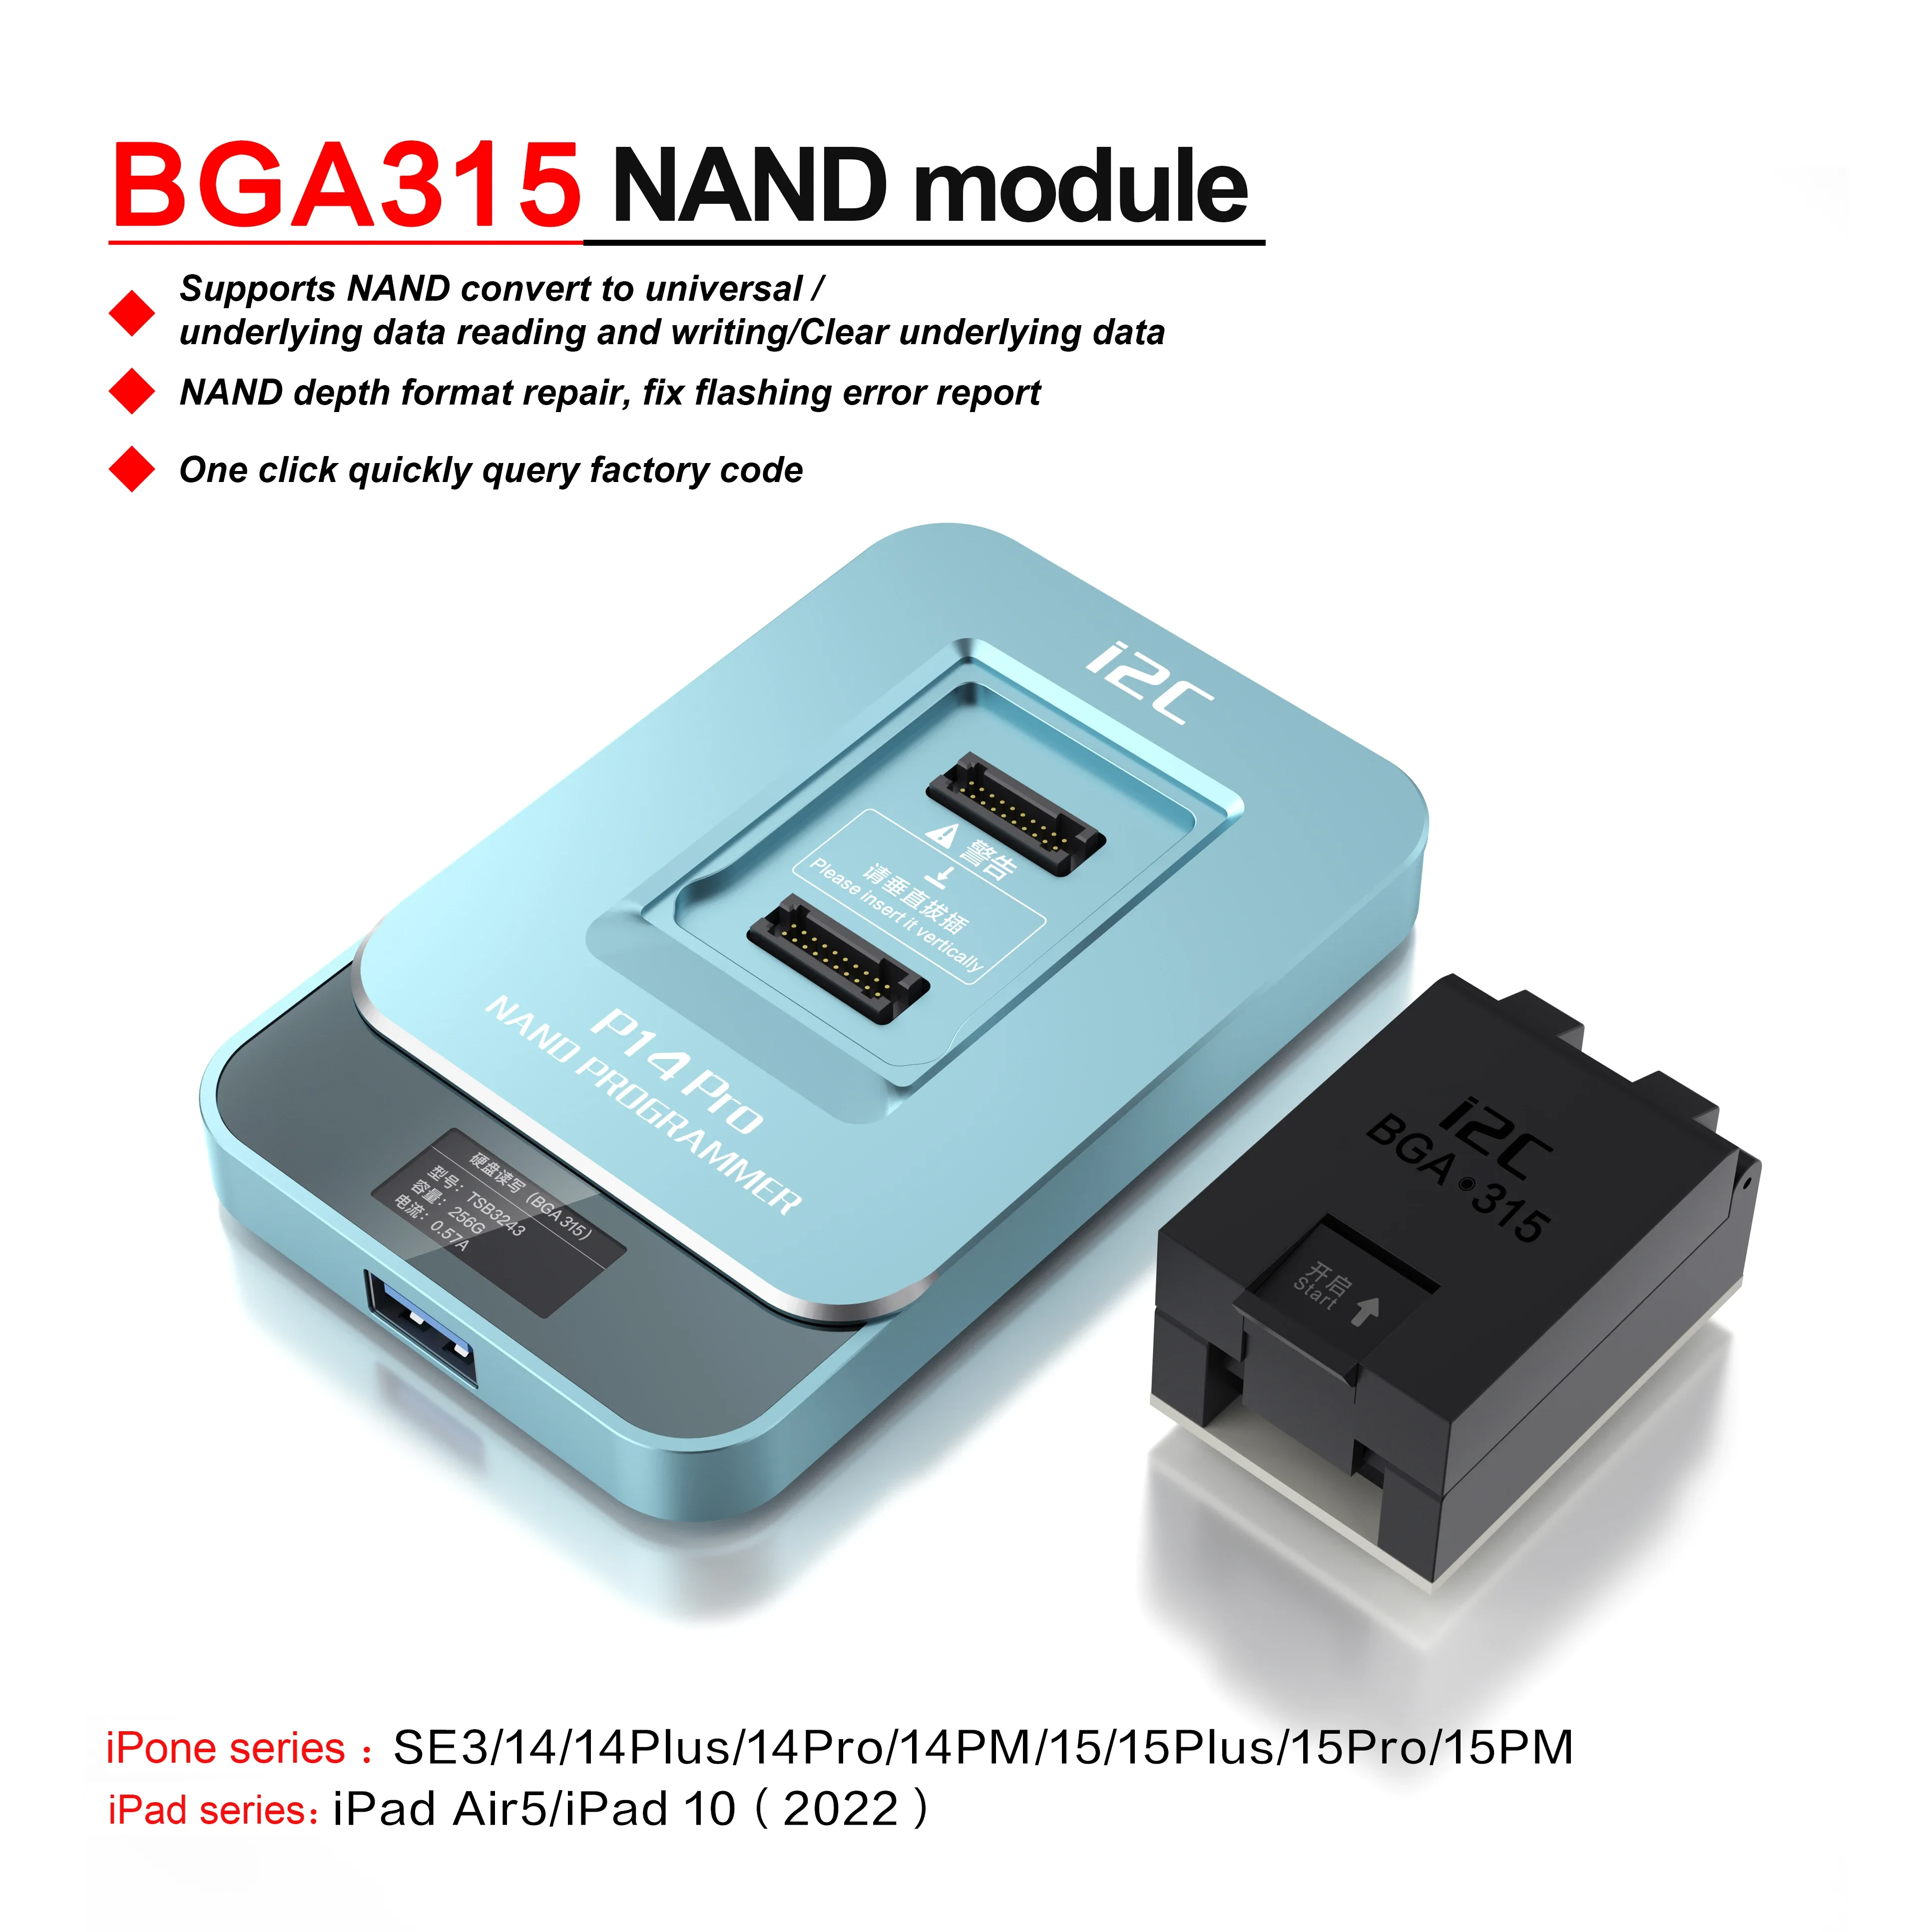 i2c-p14-pro-nand-programmer-with-bga315-module-for-iphone-6-15-pro-max-disk-format-dfu-syscfg-data-read-write-wifi-unbind-tool